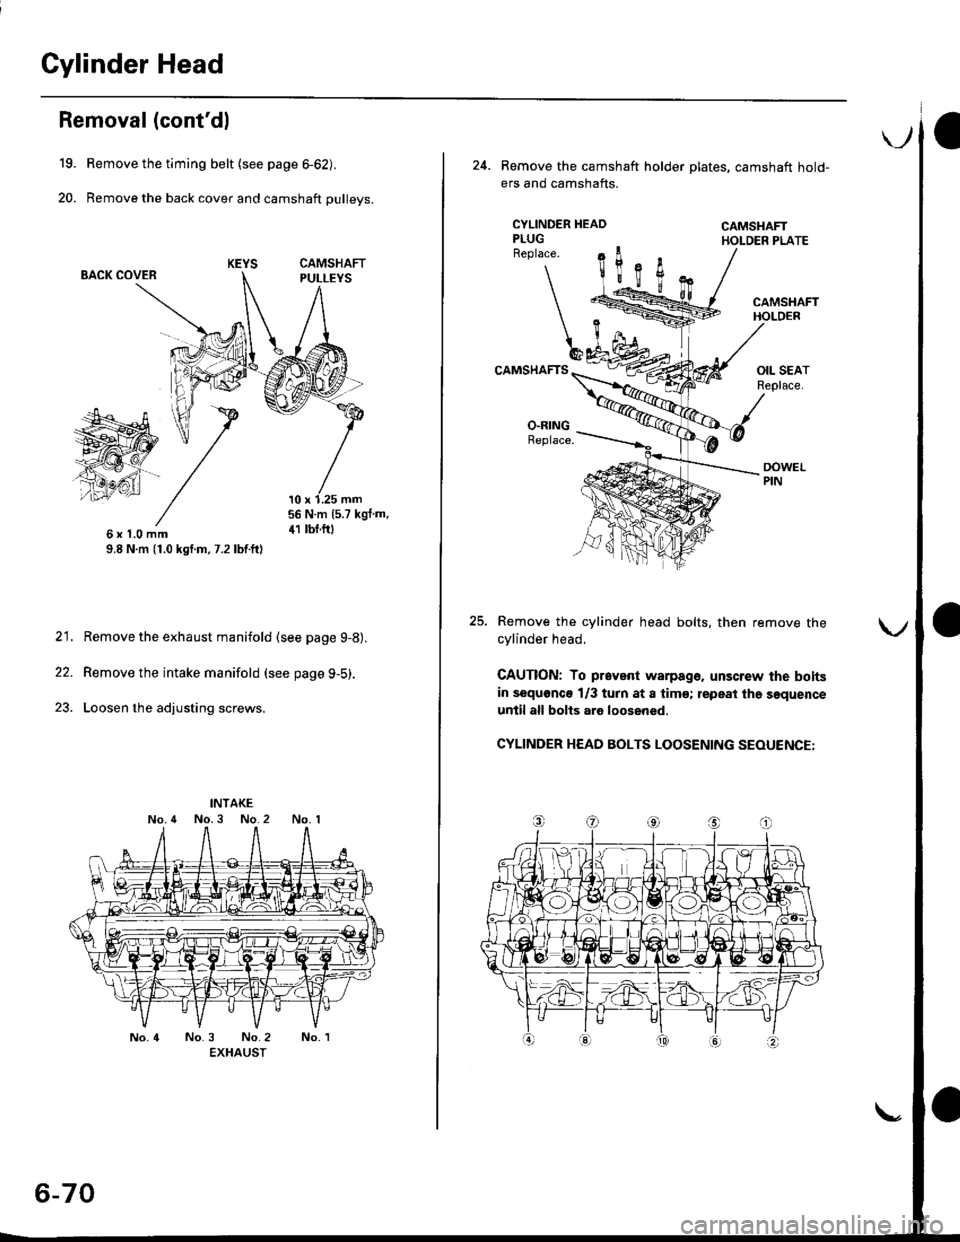 HONDA CIVIC 1996 6.G Service Manual Cylinder Head
19.
20.
Removal (contdl
Remove the timing belt {see page 6-62).
Remove the back cover and camshaft pulleys.
BACK COVER
56 N.m (5.7 kgf m,
41 tbt.f06xl.0mm9.8 N,m (1.0 kgf.m, 7.2 lbf.ft)